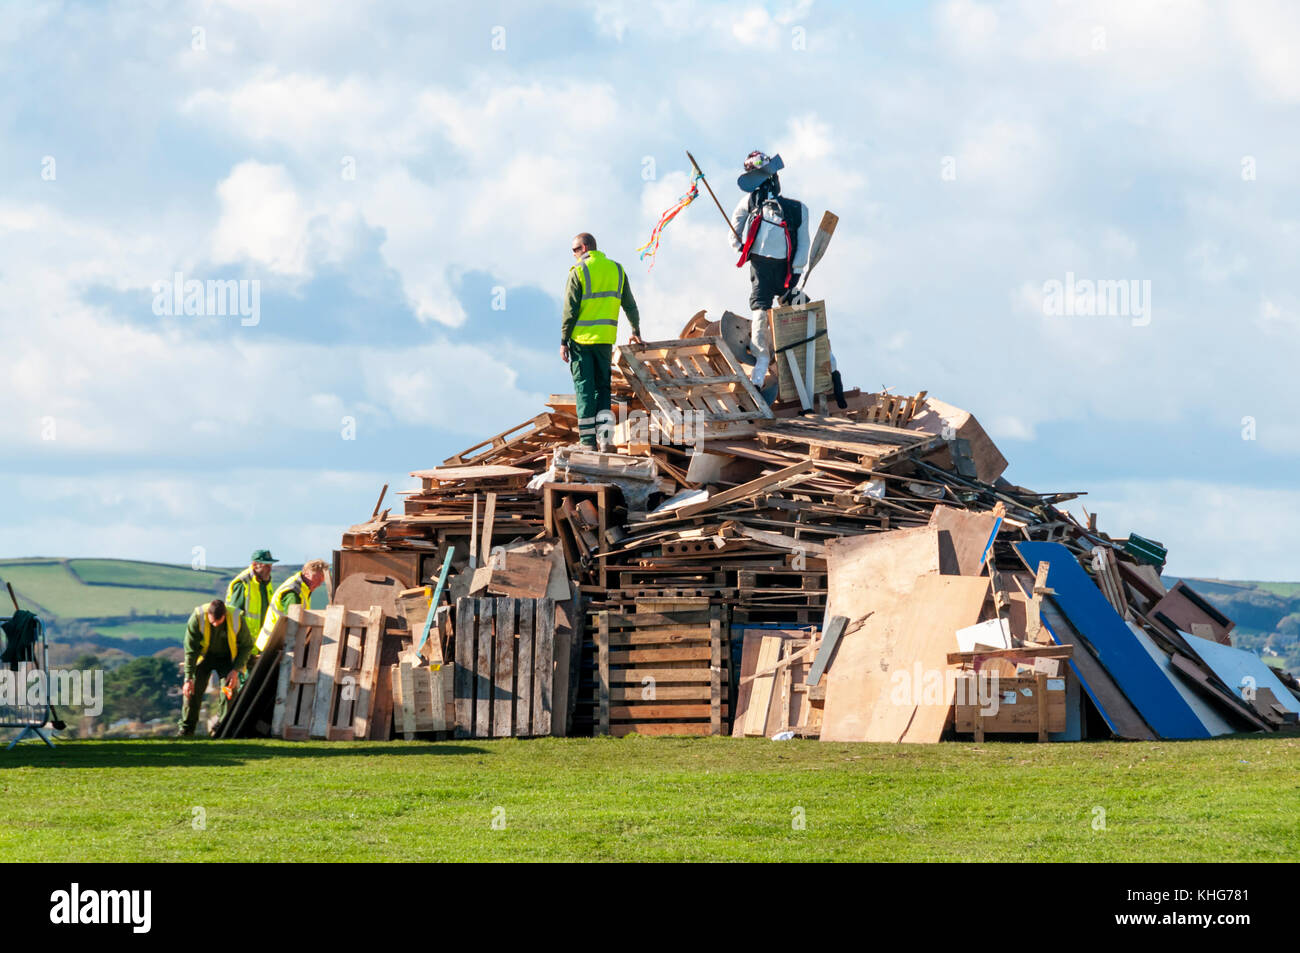 Council workers building the municipal bonfire on Plymouth Hoe ready for Guy Fawkes' night. Stock Photo